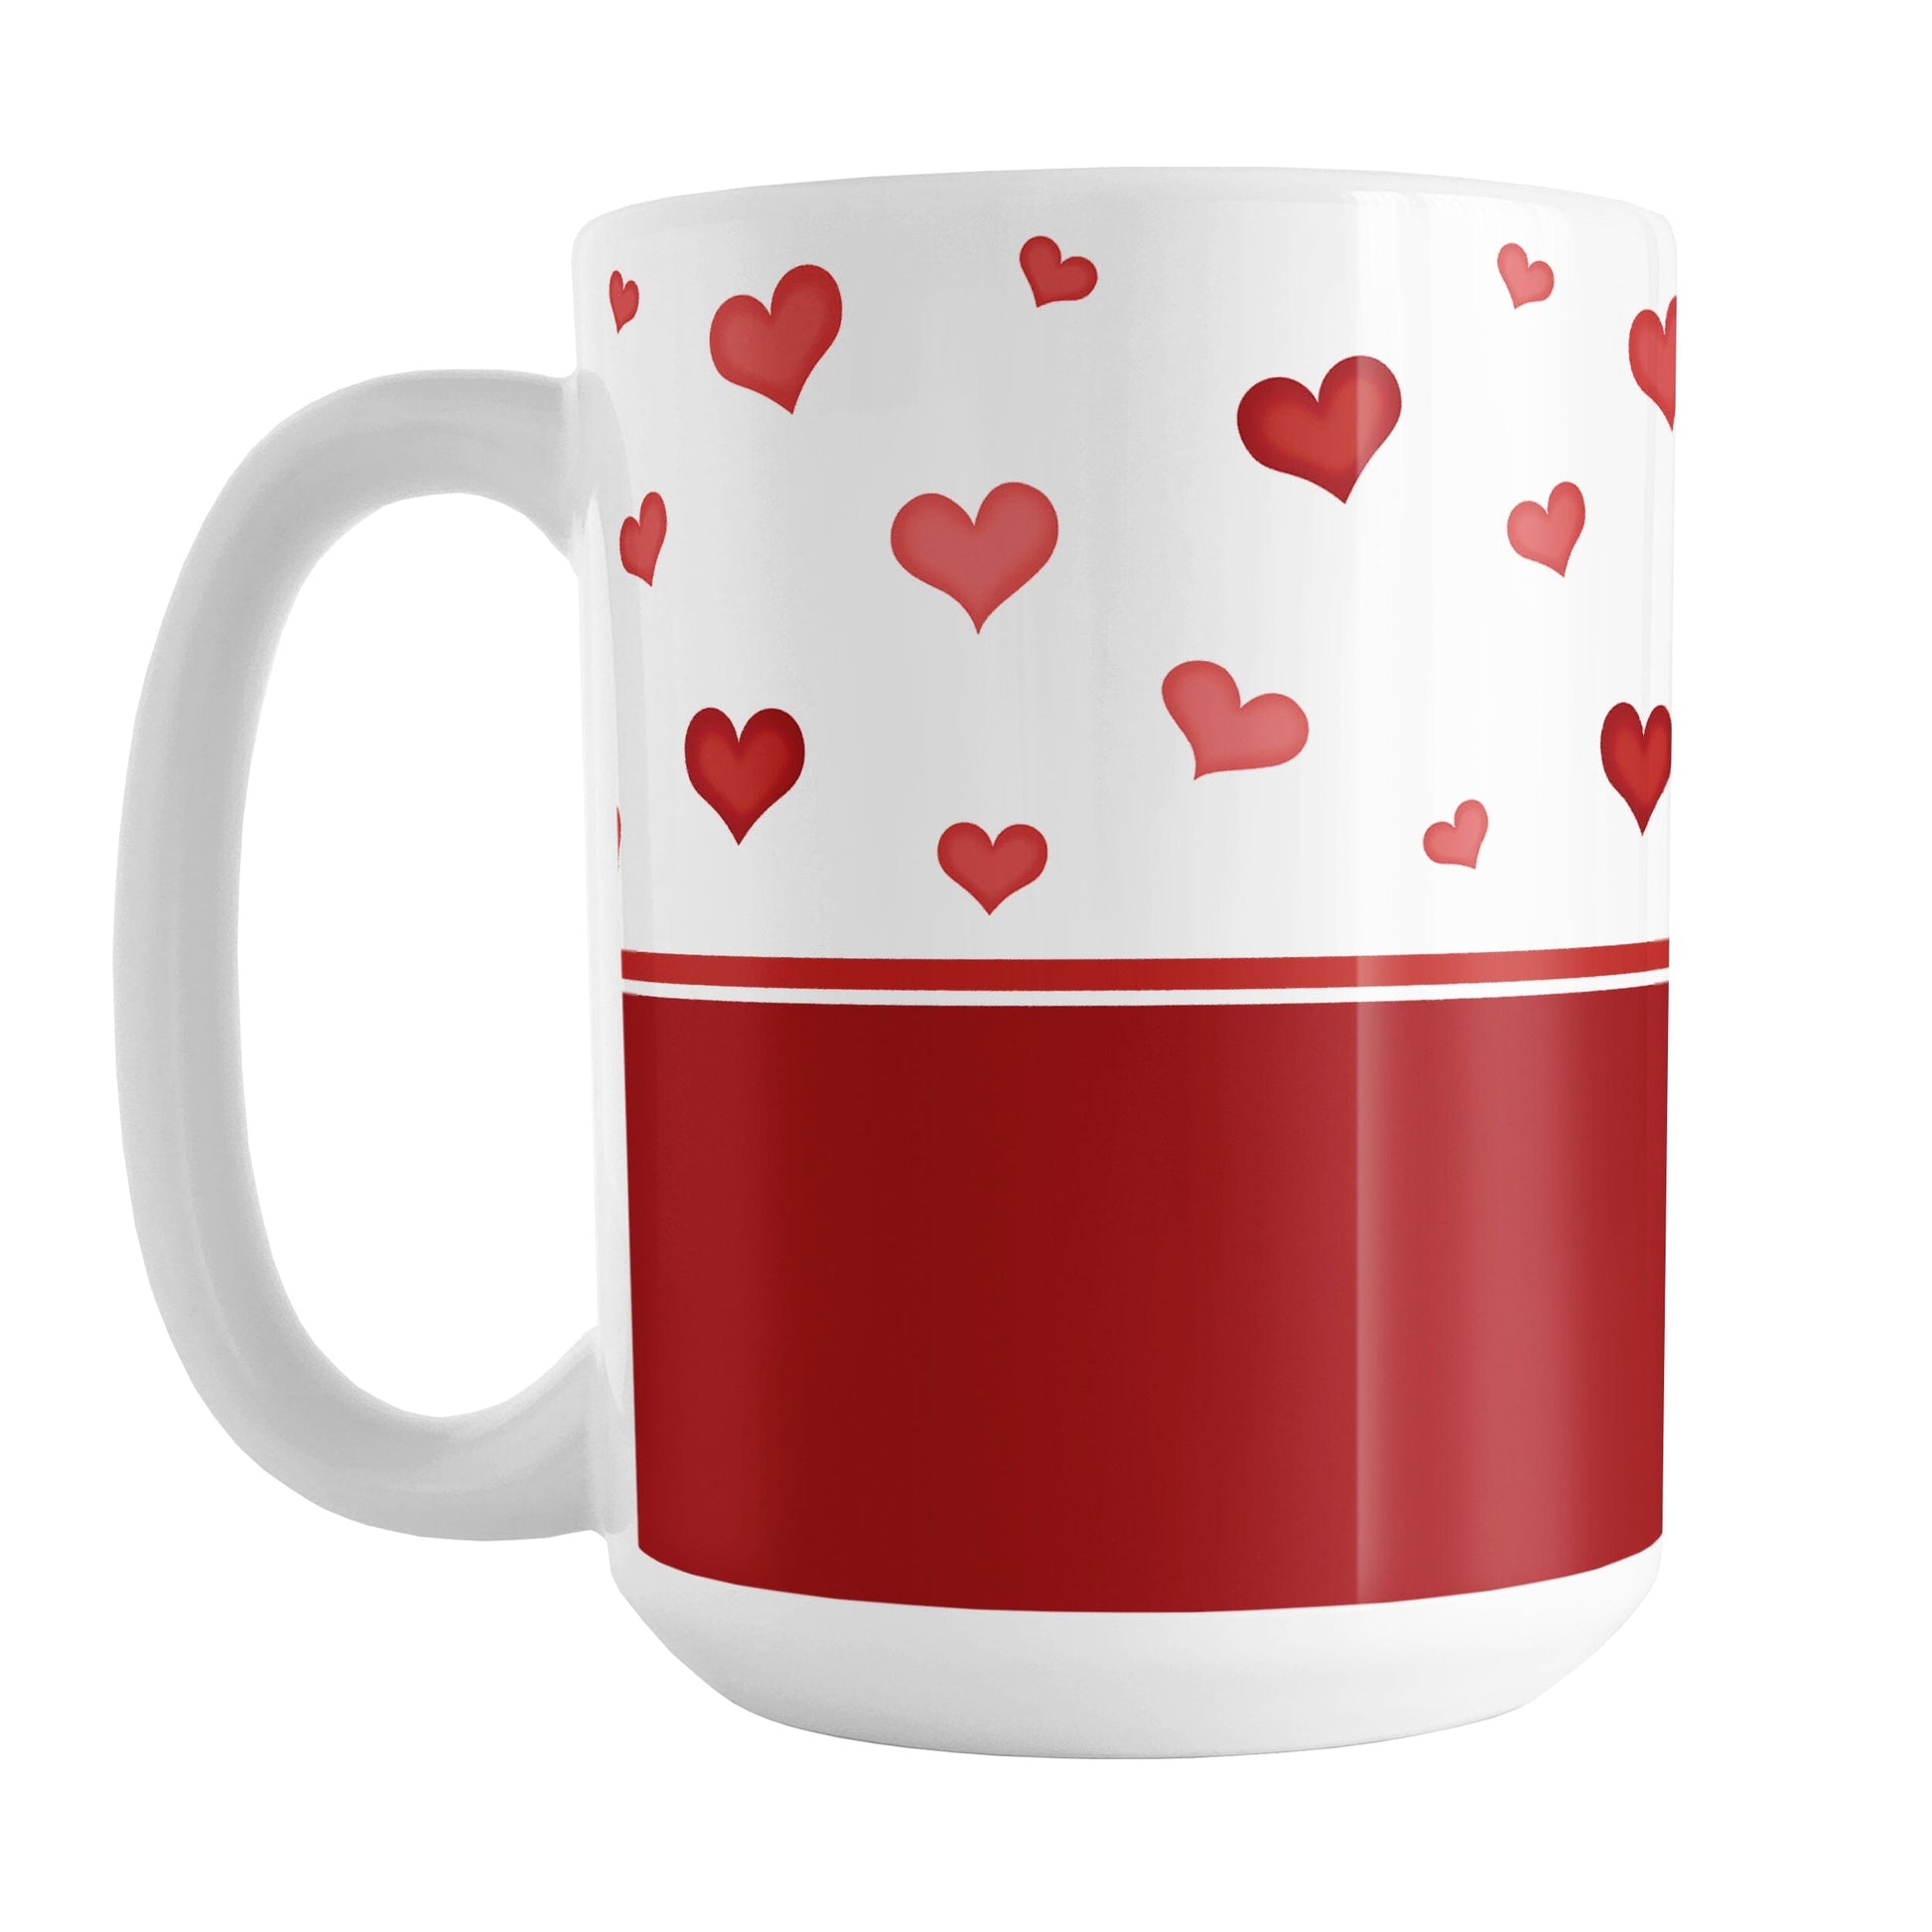 Cute Hearts and Red Mug (15oz) at Amy's Coffee Mugs. A ceramic coffee mug designed with a print of small cute hand-drawn red hearts in different shades of red in a pattern along the top and a tall darker red stripe along the bottom that wraps around the mug to the handle.